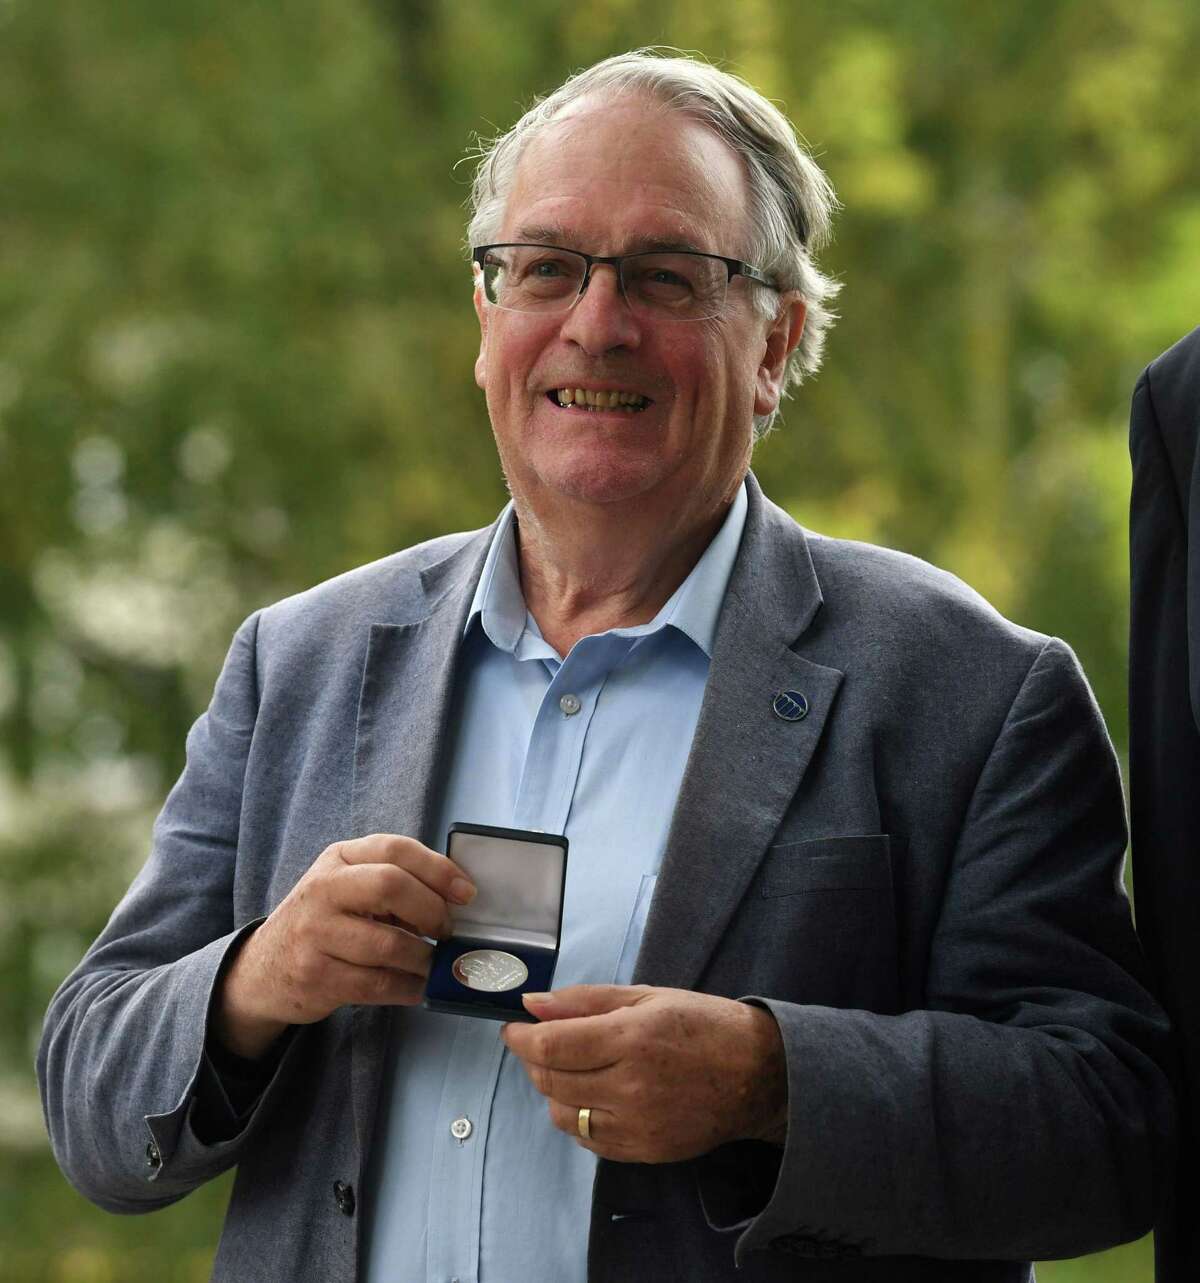 2019 Nobel Prize Laureate in Chemistry, British Stanley Whittingham, poses with the Einstein medal, after being awarded by the mayor of Ulm (unseen), in Ulm, southern Germany, on October 9, 2019. - John Goodenough of the US, Britain's Stanley Whittingham and Japan's Akira Yoshino won the 2019 Nobel Chemistry Prize for the development of lithium-ion batteries, the Royal Swedish Academy of Sciences in Stockholm, Sweden, said. (Photo by Christof STACHE / AFP) (Photo by CHRISTOF STACHE/AFP via Getty Images)